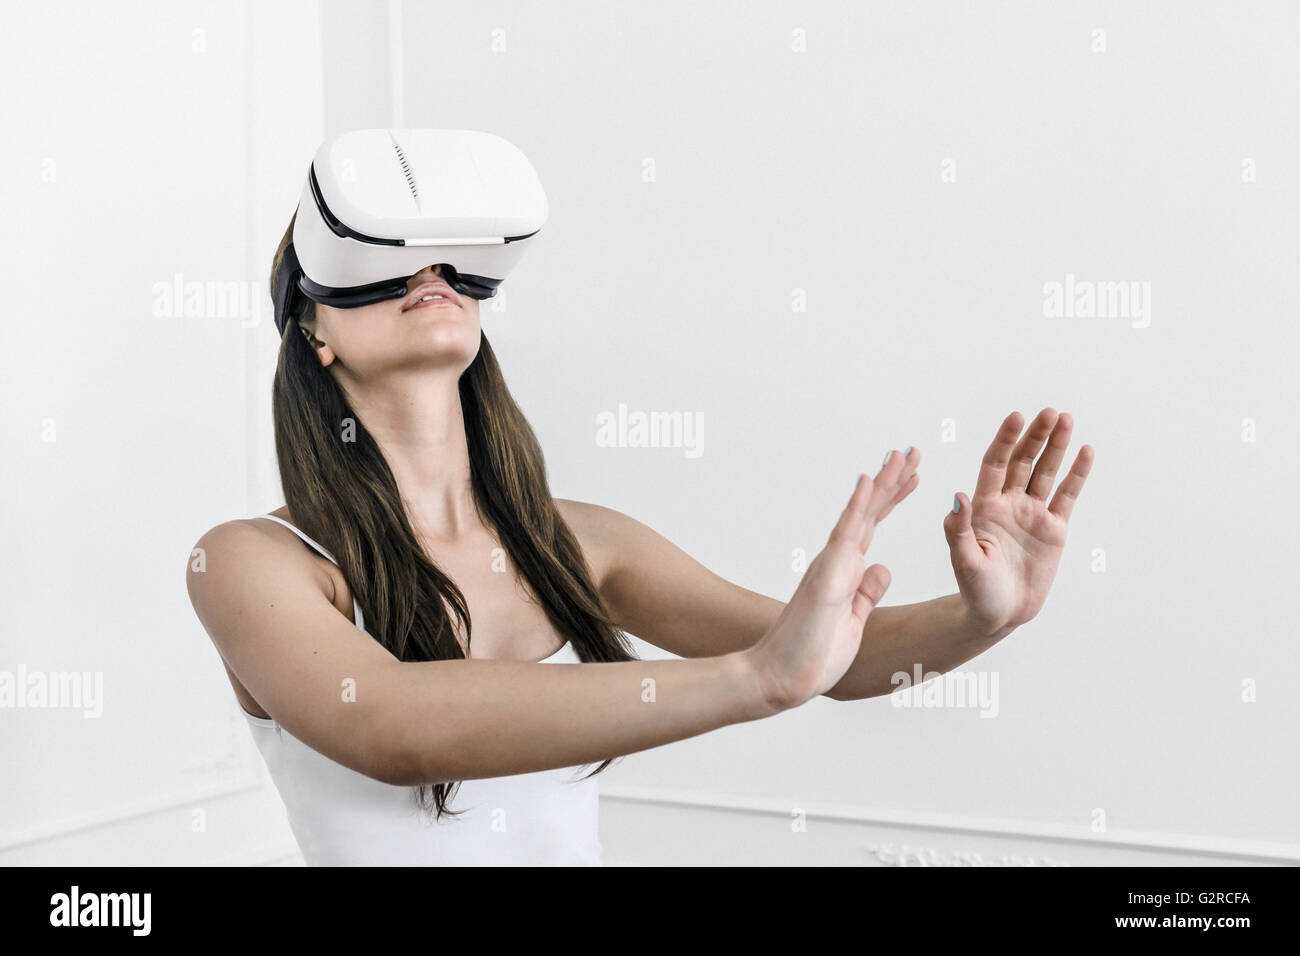 A young white woman with dark hair stands with arms outstretched to feel and sense with a Virtual reality heasdet on her head Stock Photo